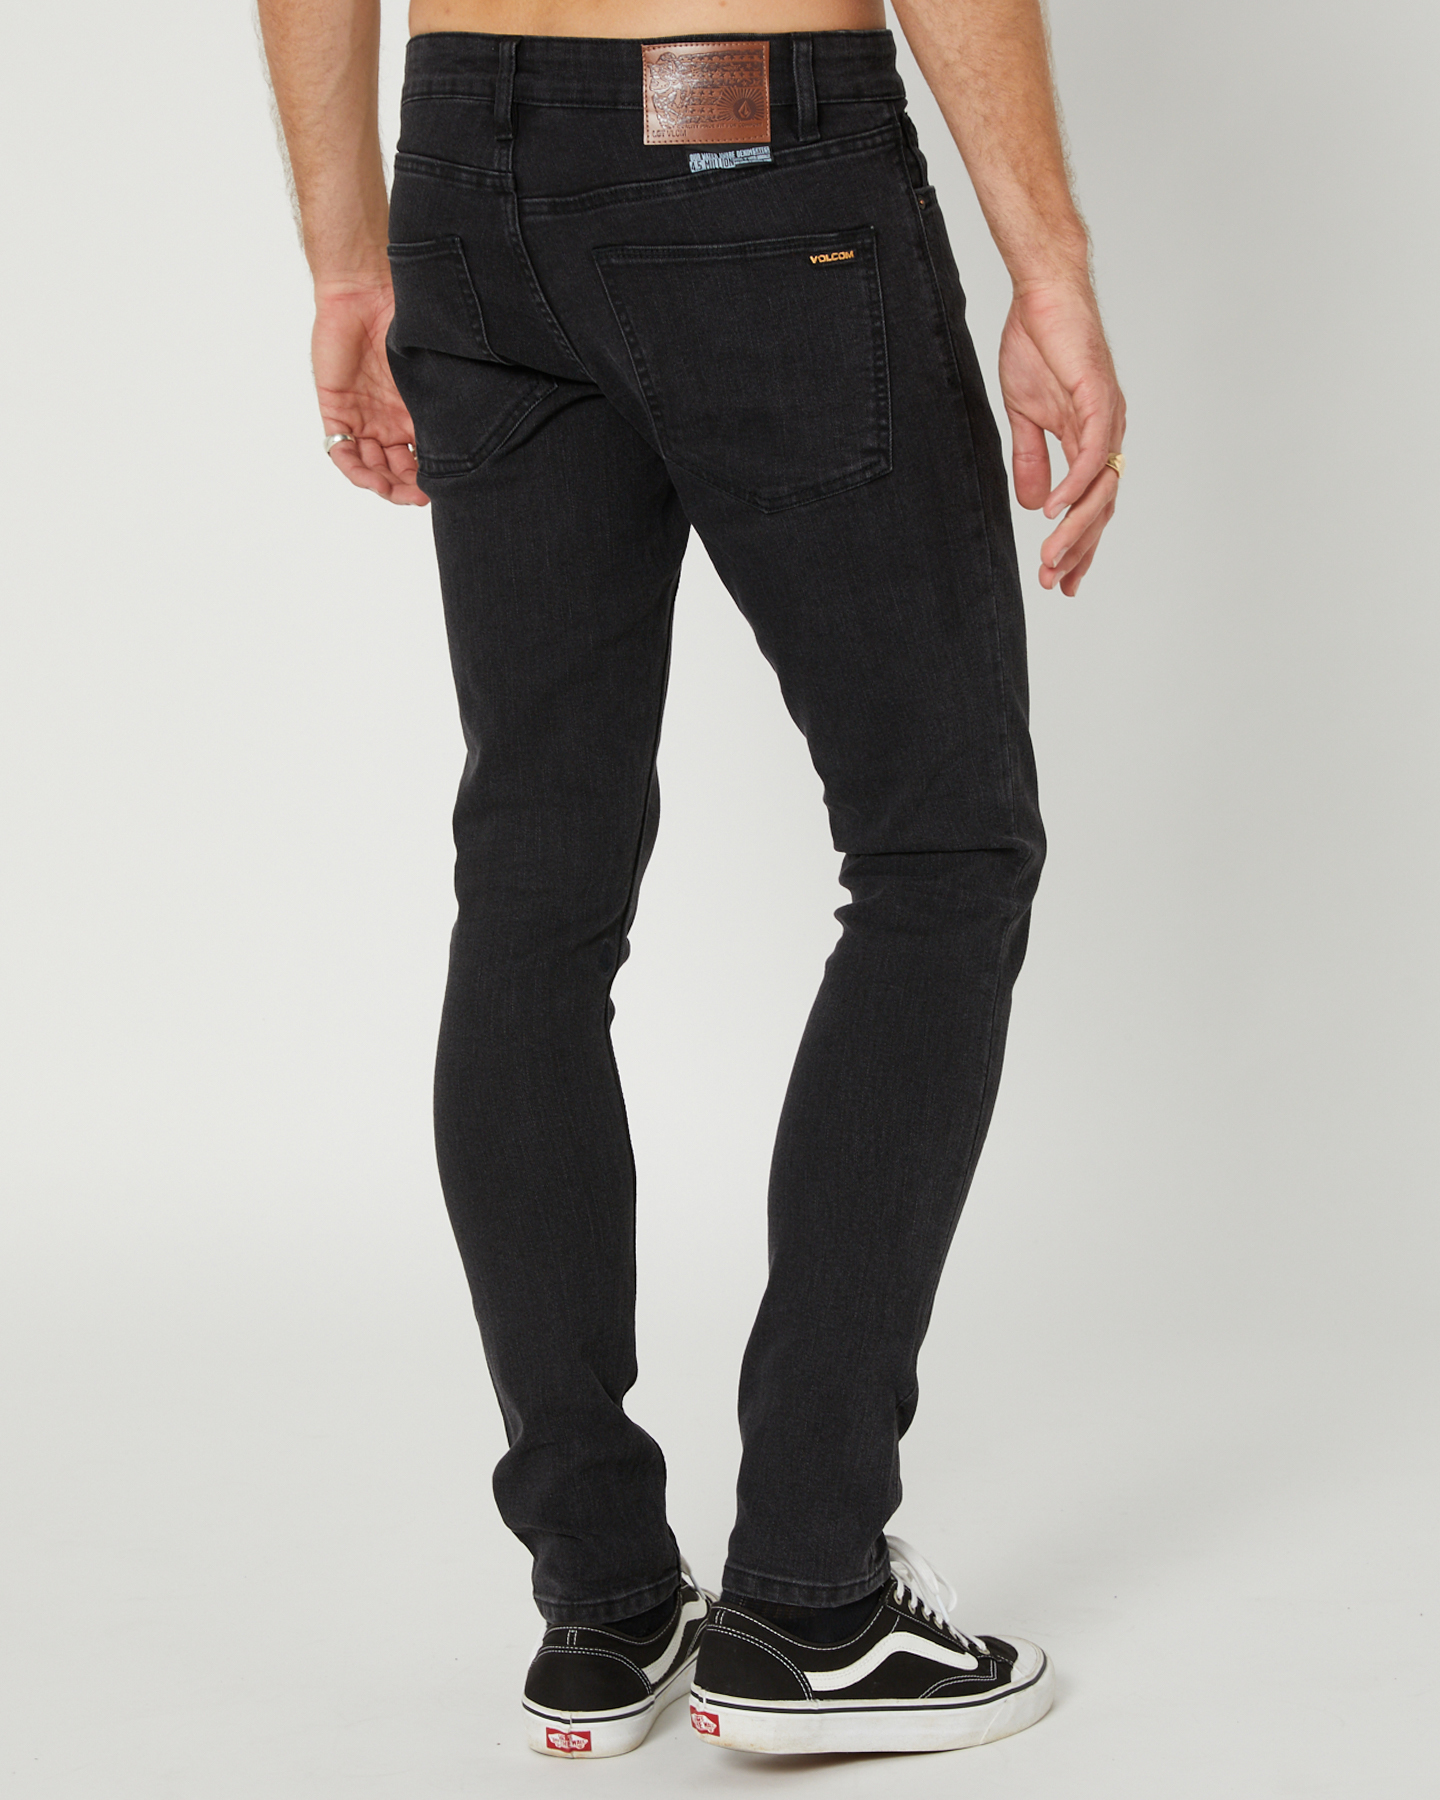 Volcom 2X4 Tapered Mens Jean - Washed Black Out | SurfStitch